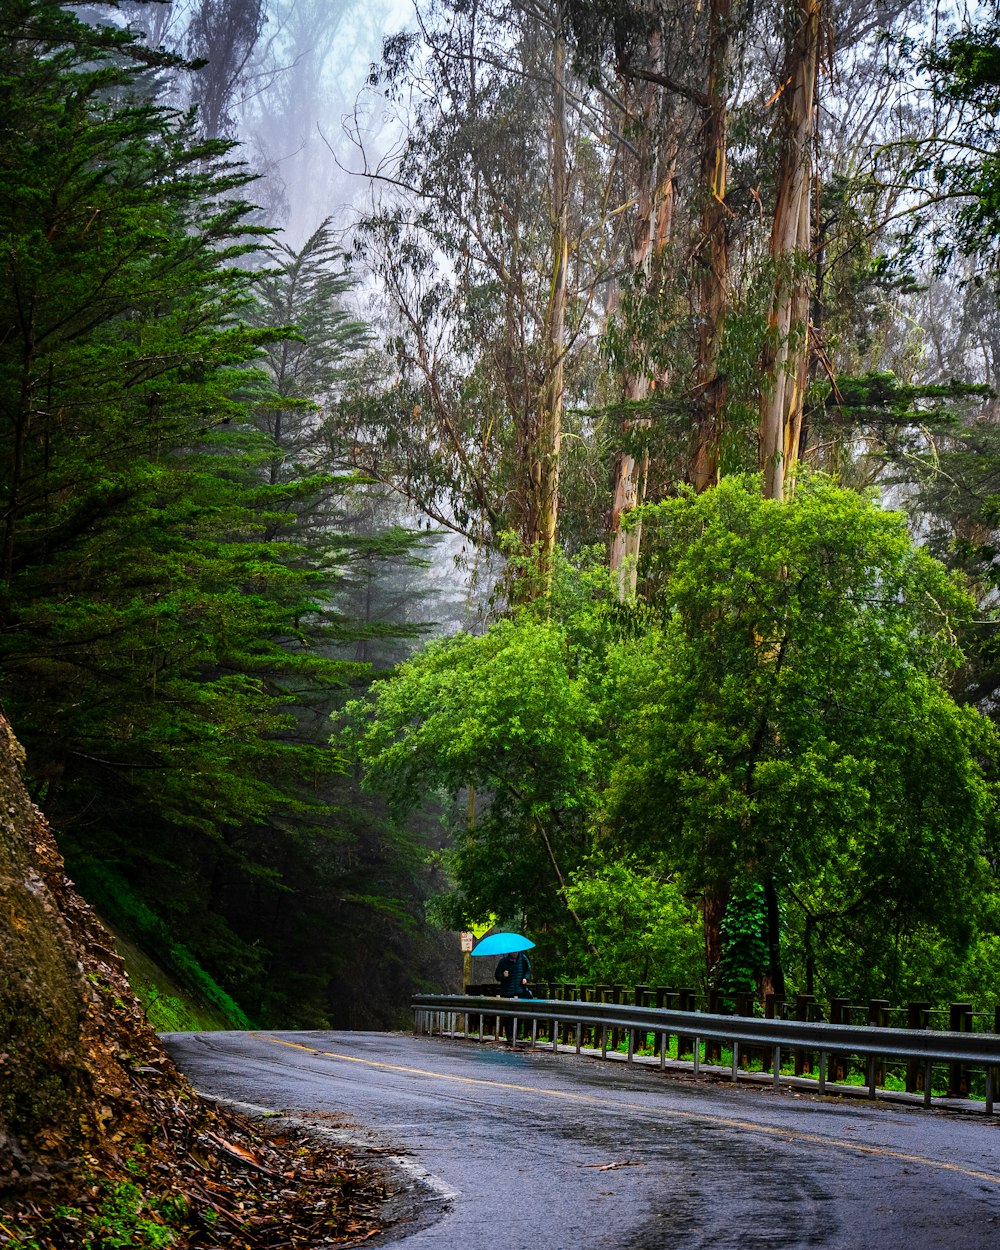 a person with a blue umbrella on a road